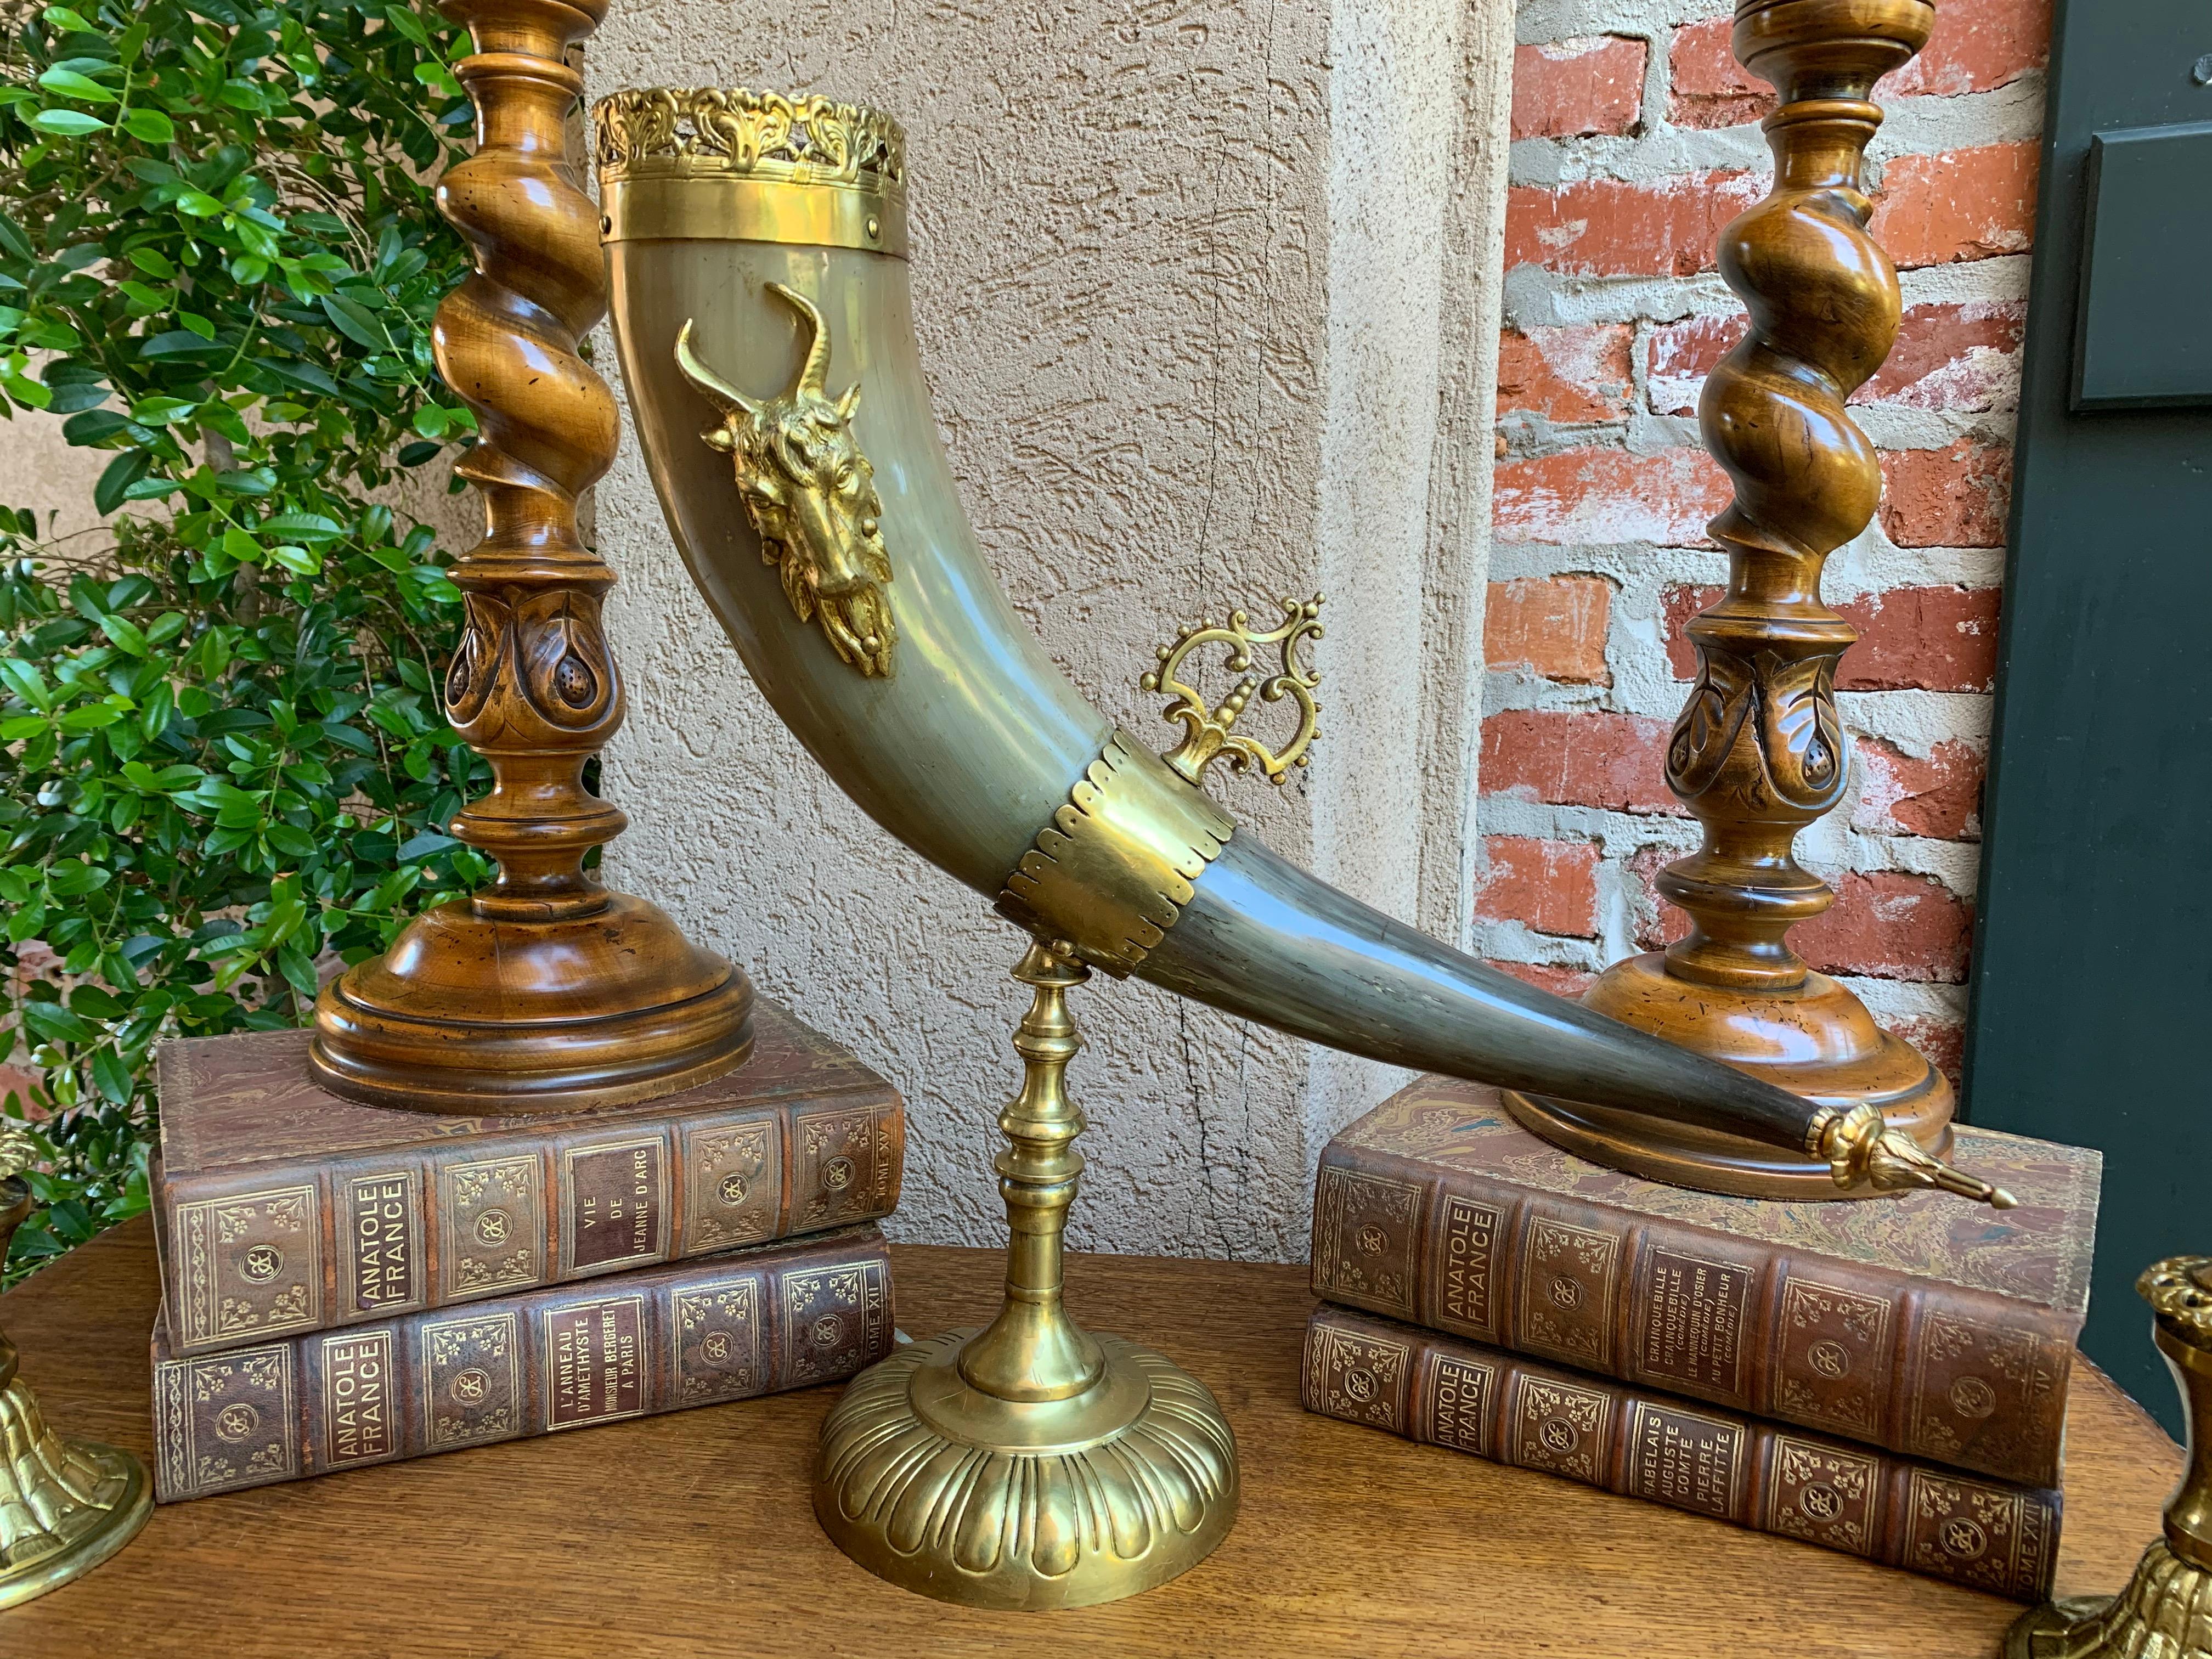 Direct from England, just arrived in our most recent container, we have several of these fabulous antique ‘hunt horns”, extremely sought after as unique accessories for a library, den or office!.~

~History – In 19th century Europe these antique